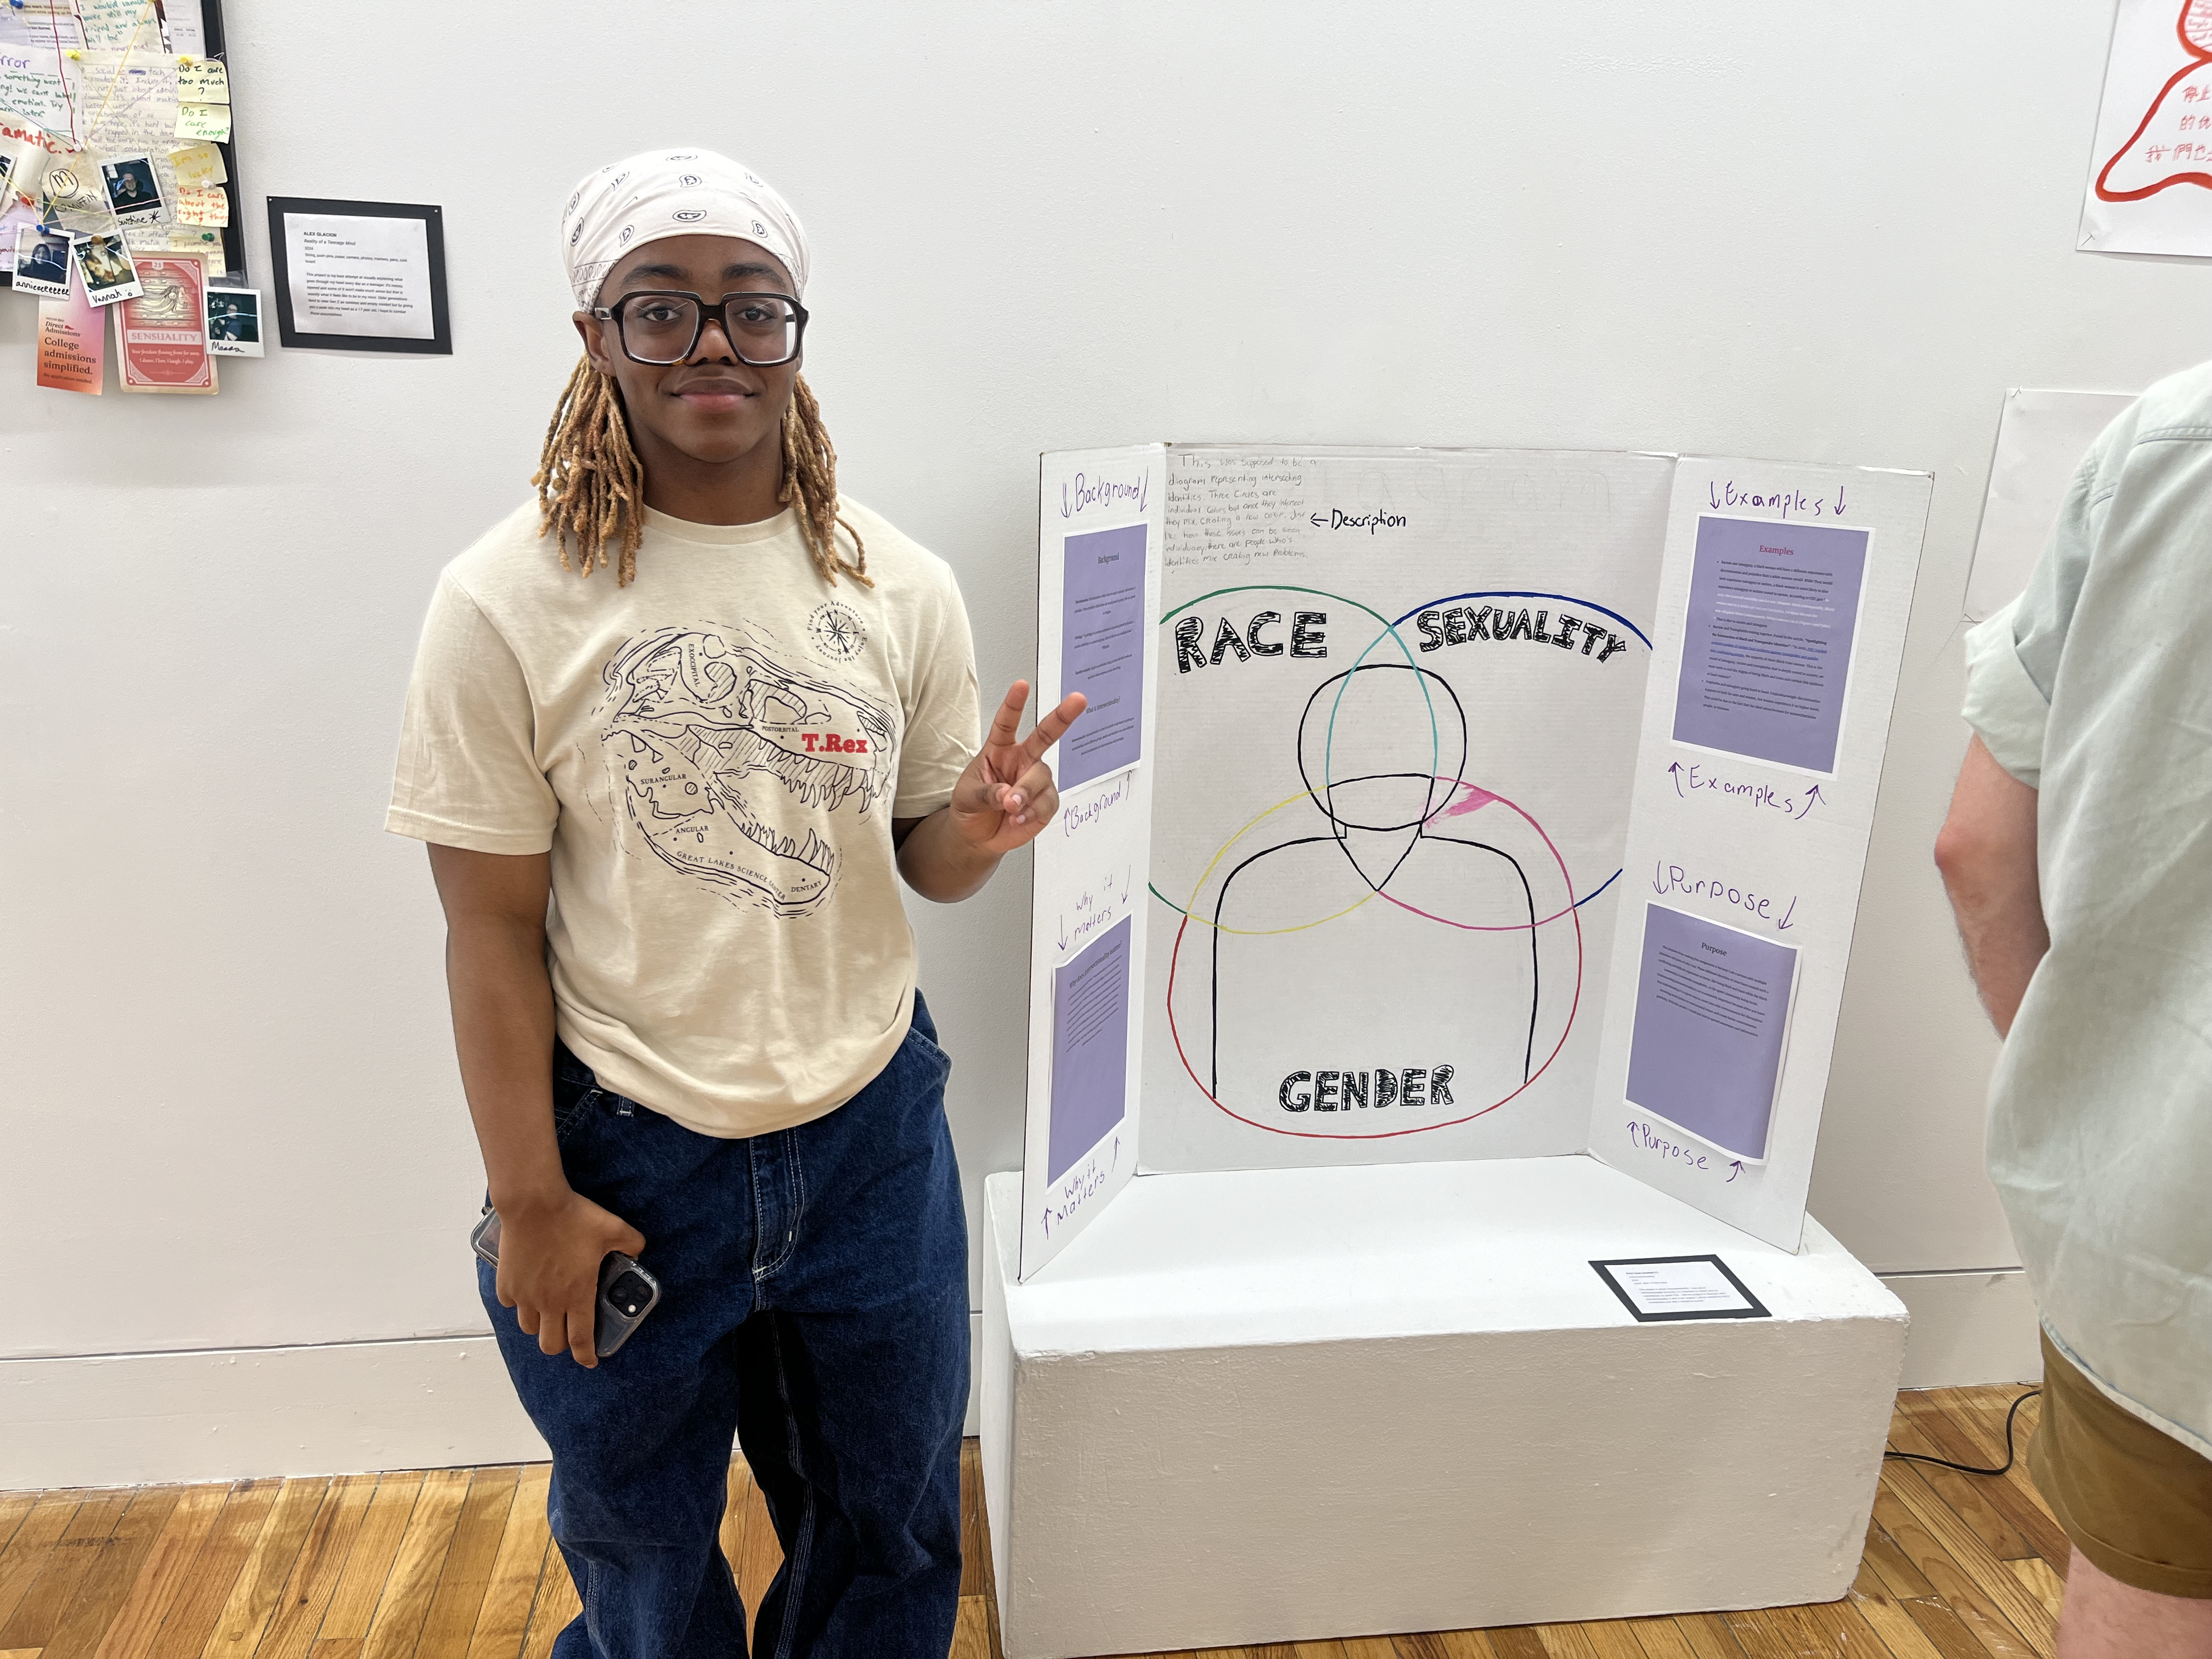 LEAP student, Rae'Von, standing next to a trifold board with drawings and printed text that he created